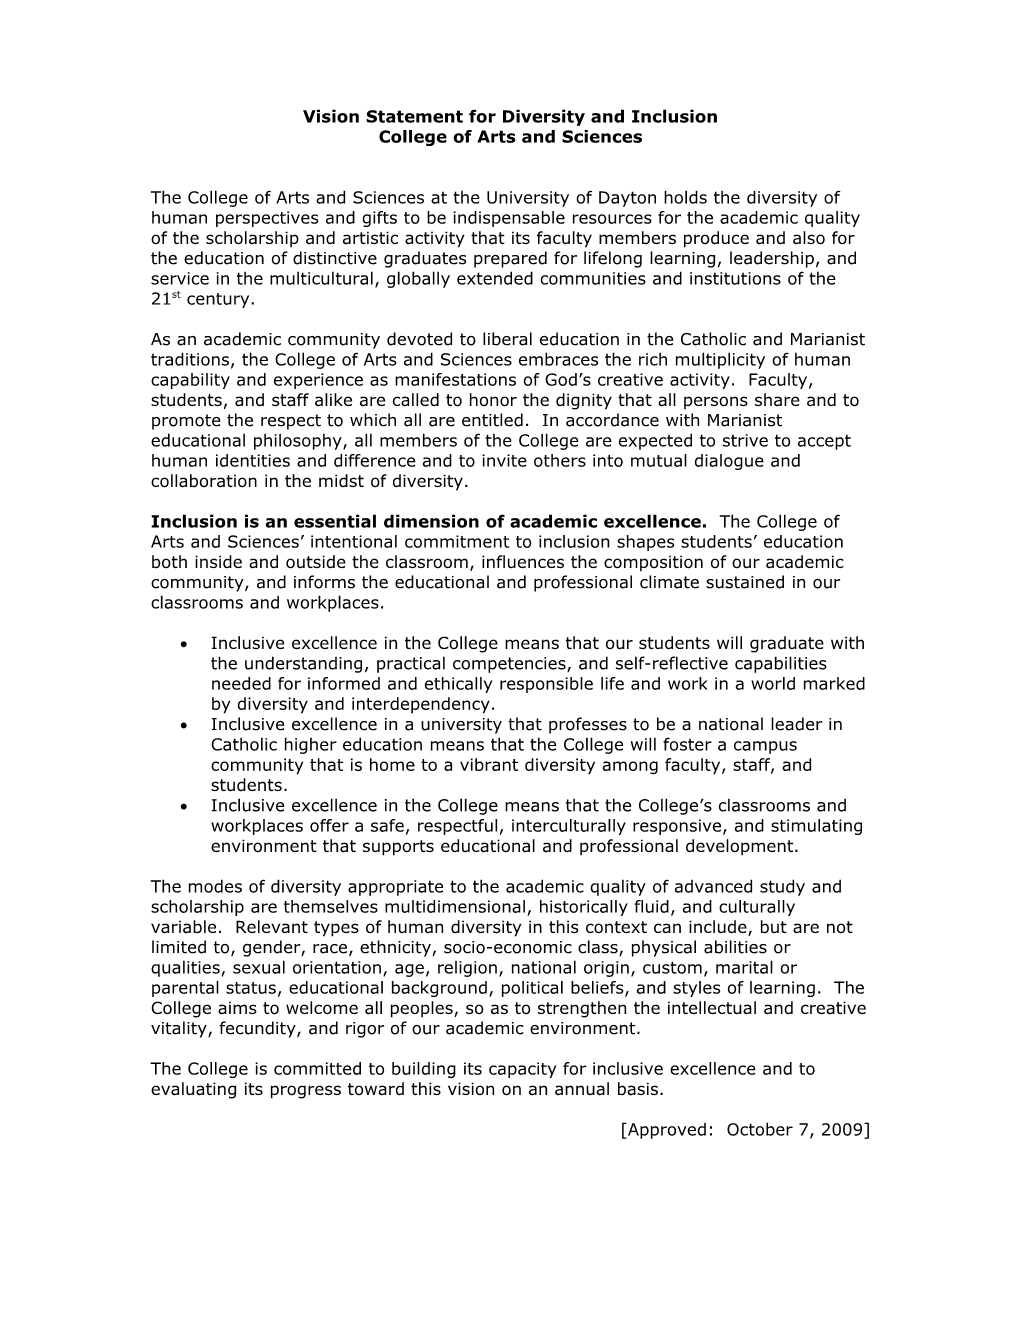 CAS Vision Statement for Diversity and Inclusion: Draft 1